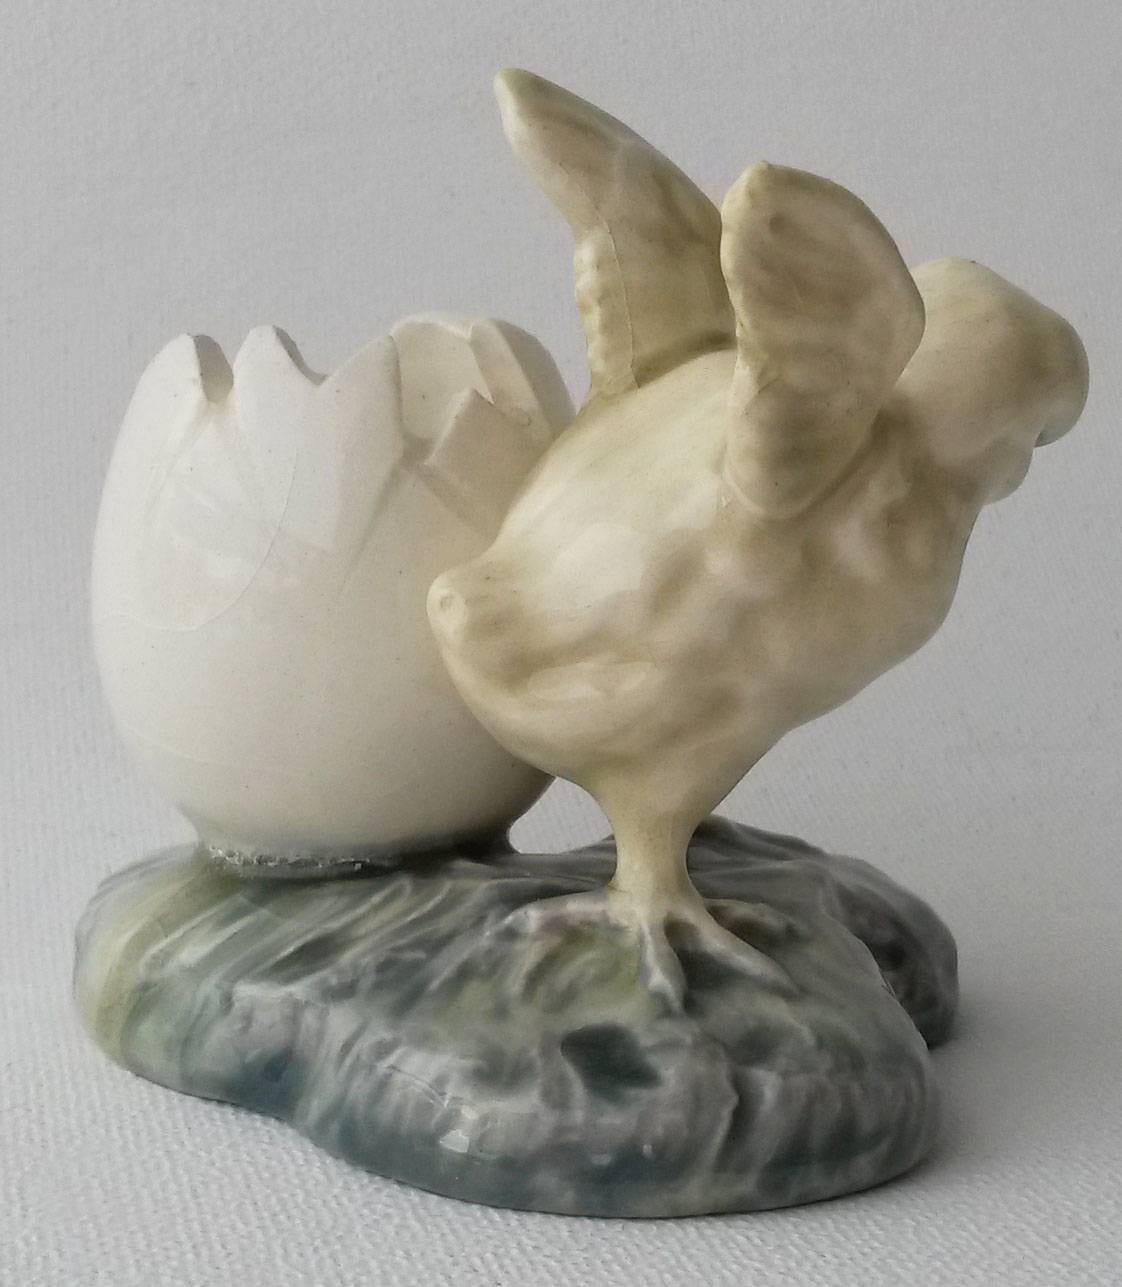 French Majolica vase with a yellow chick against an egg vase, circa 1900. Attributed to Delphin Massier.